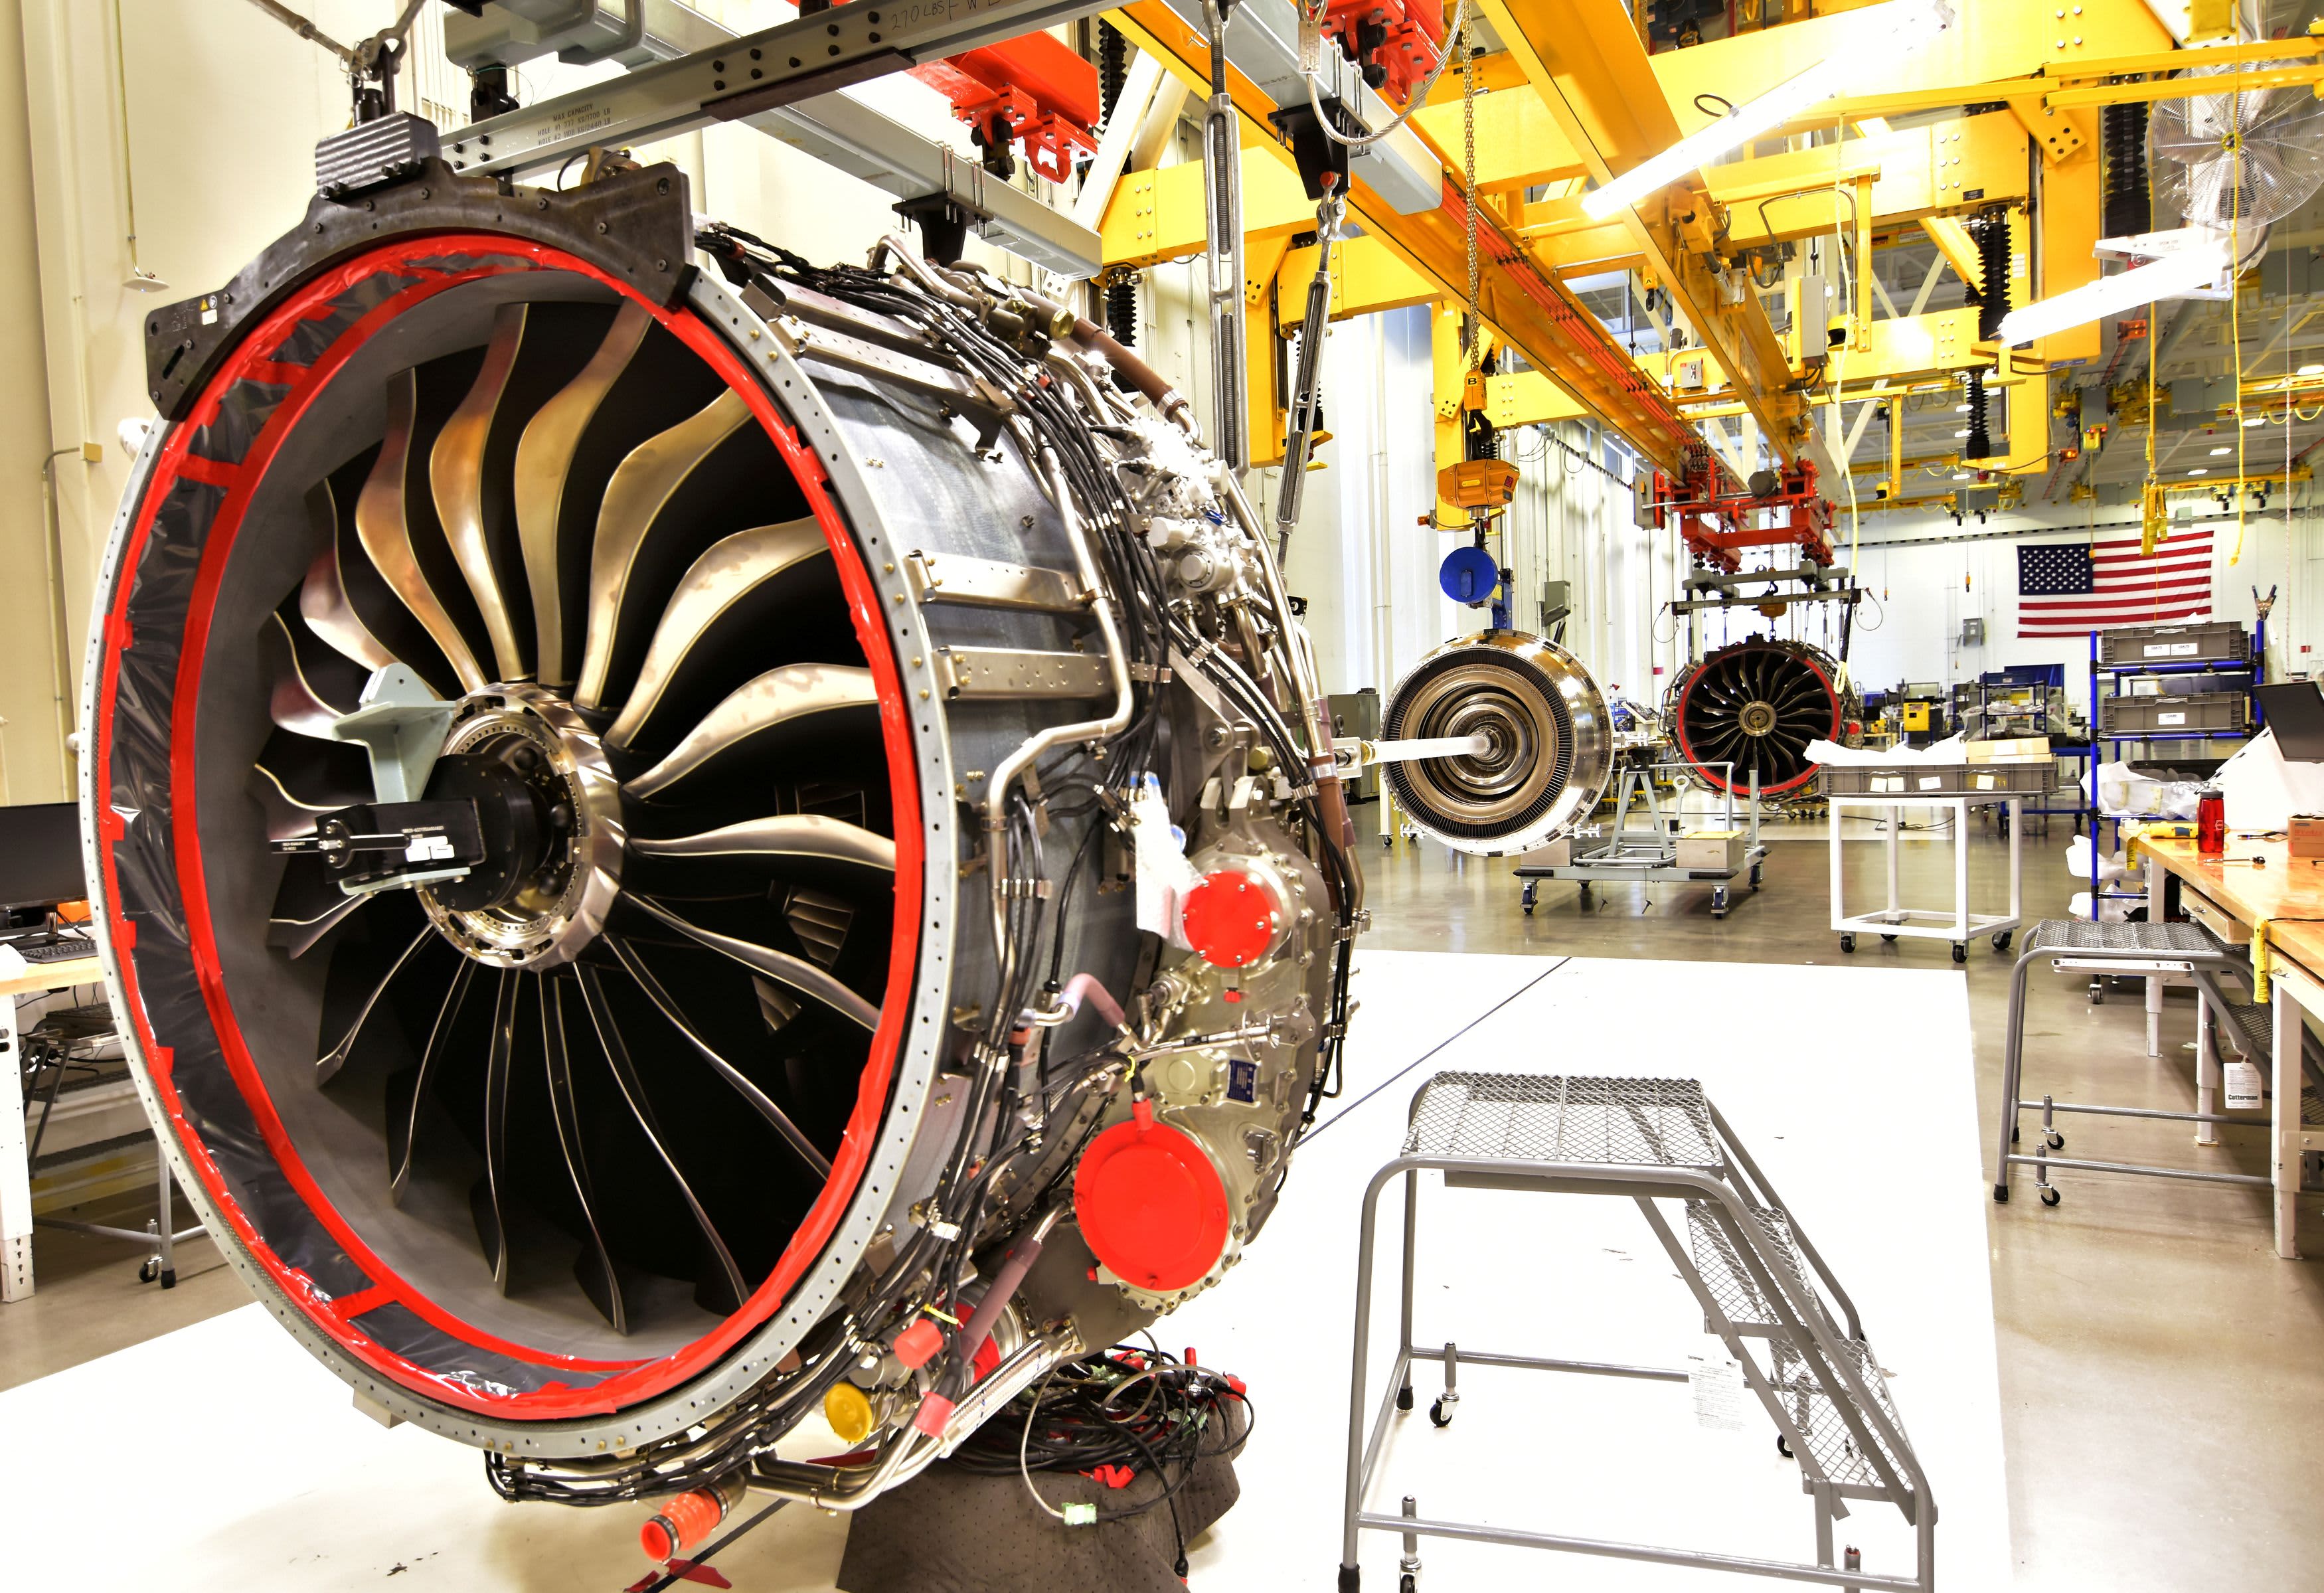 GE aircraft leasing unit to combine with rival AerCap lessor